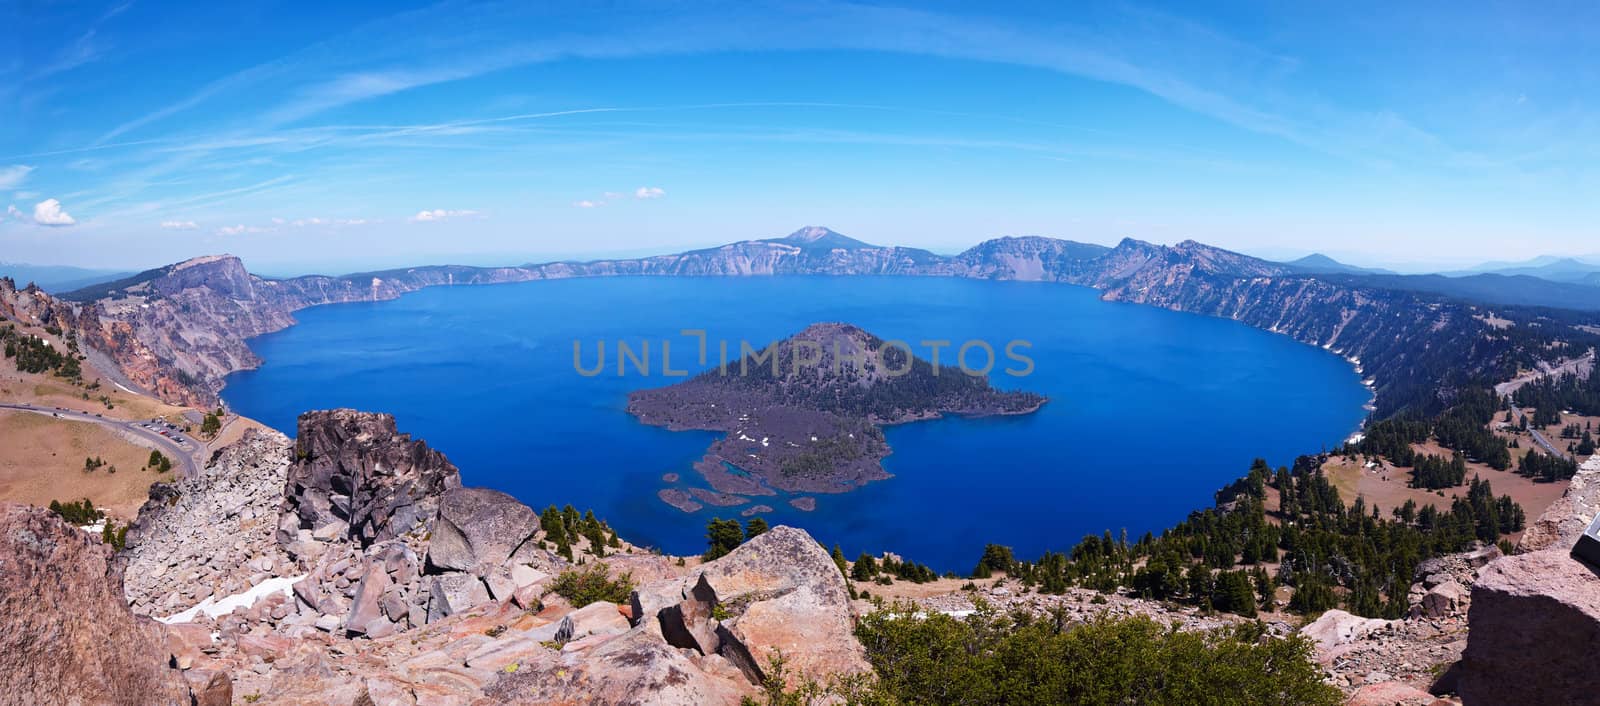 Crater Lake panorama by LoonChild